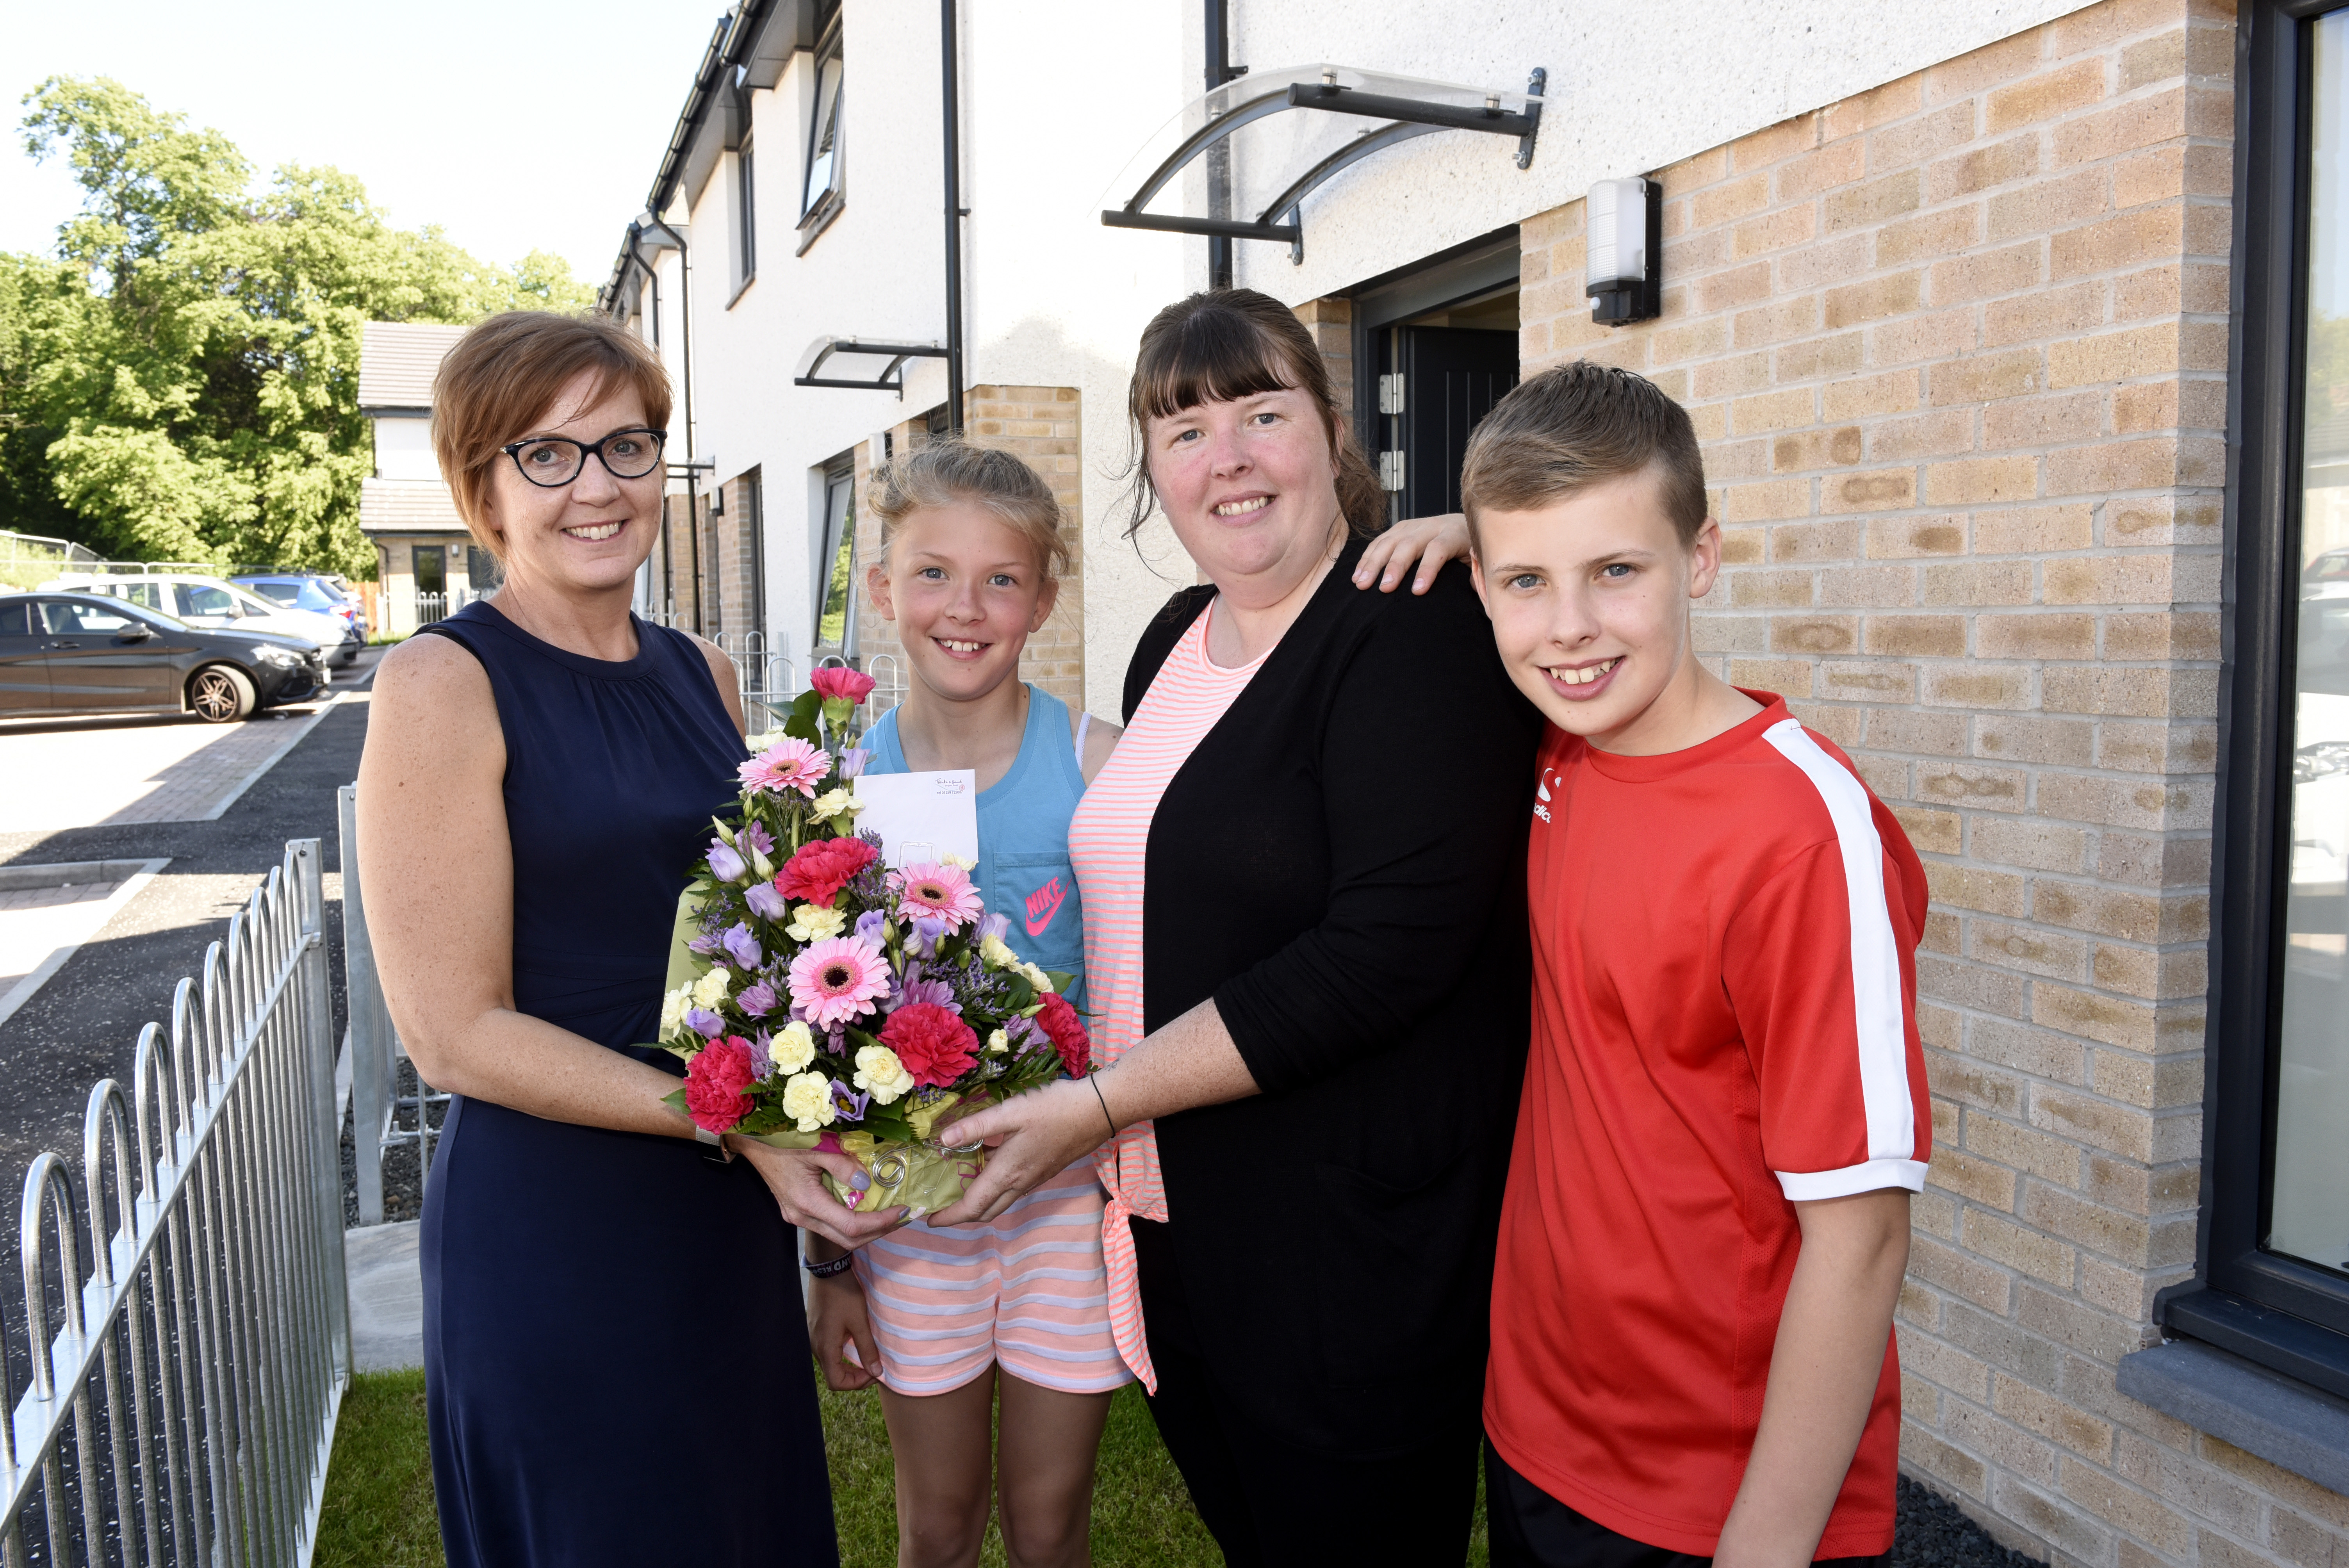 Ochil View welcomes 1,400th tenant